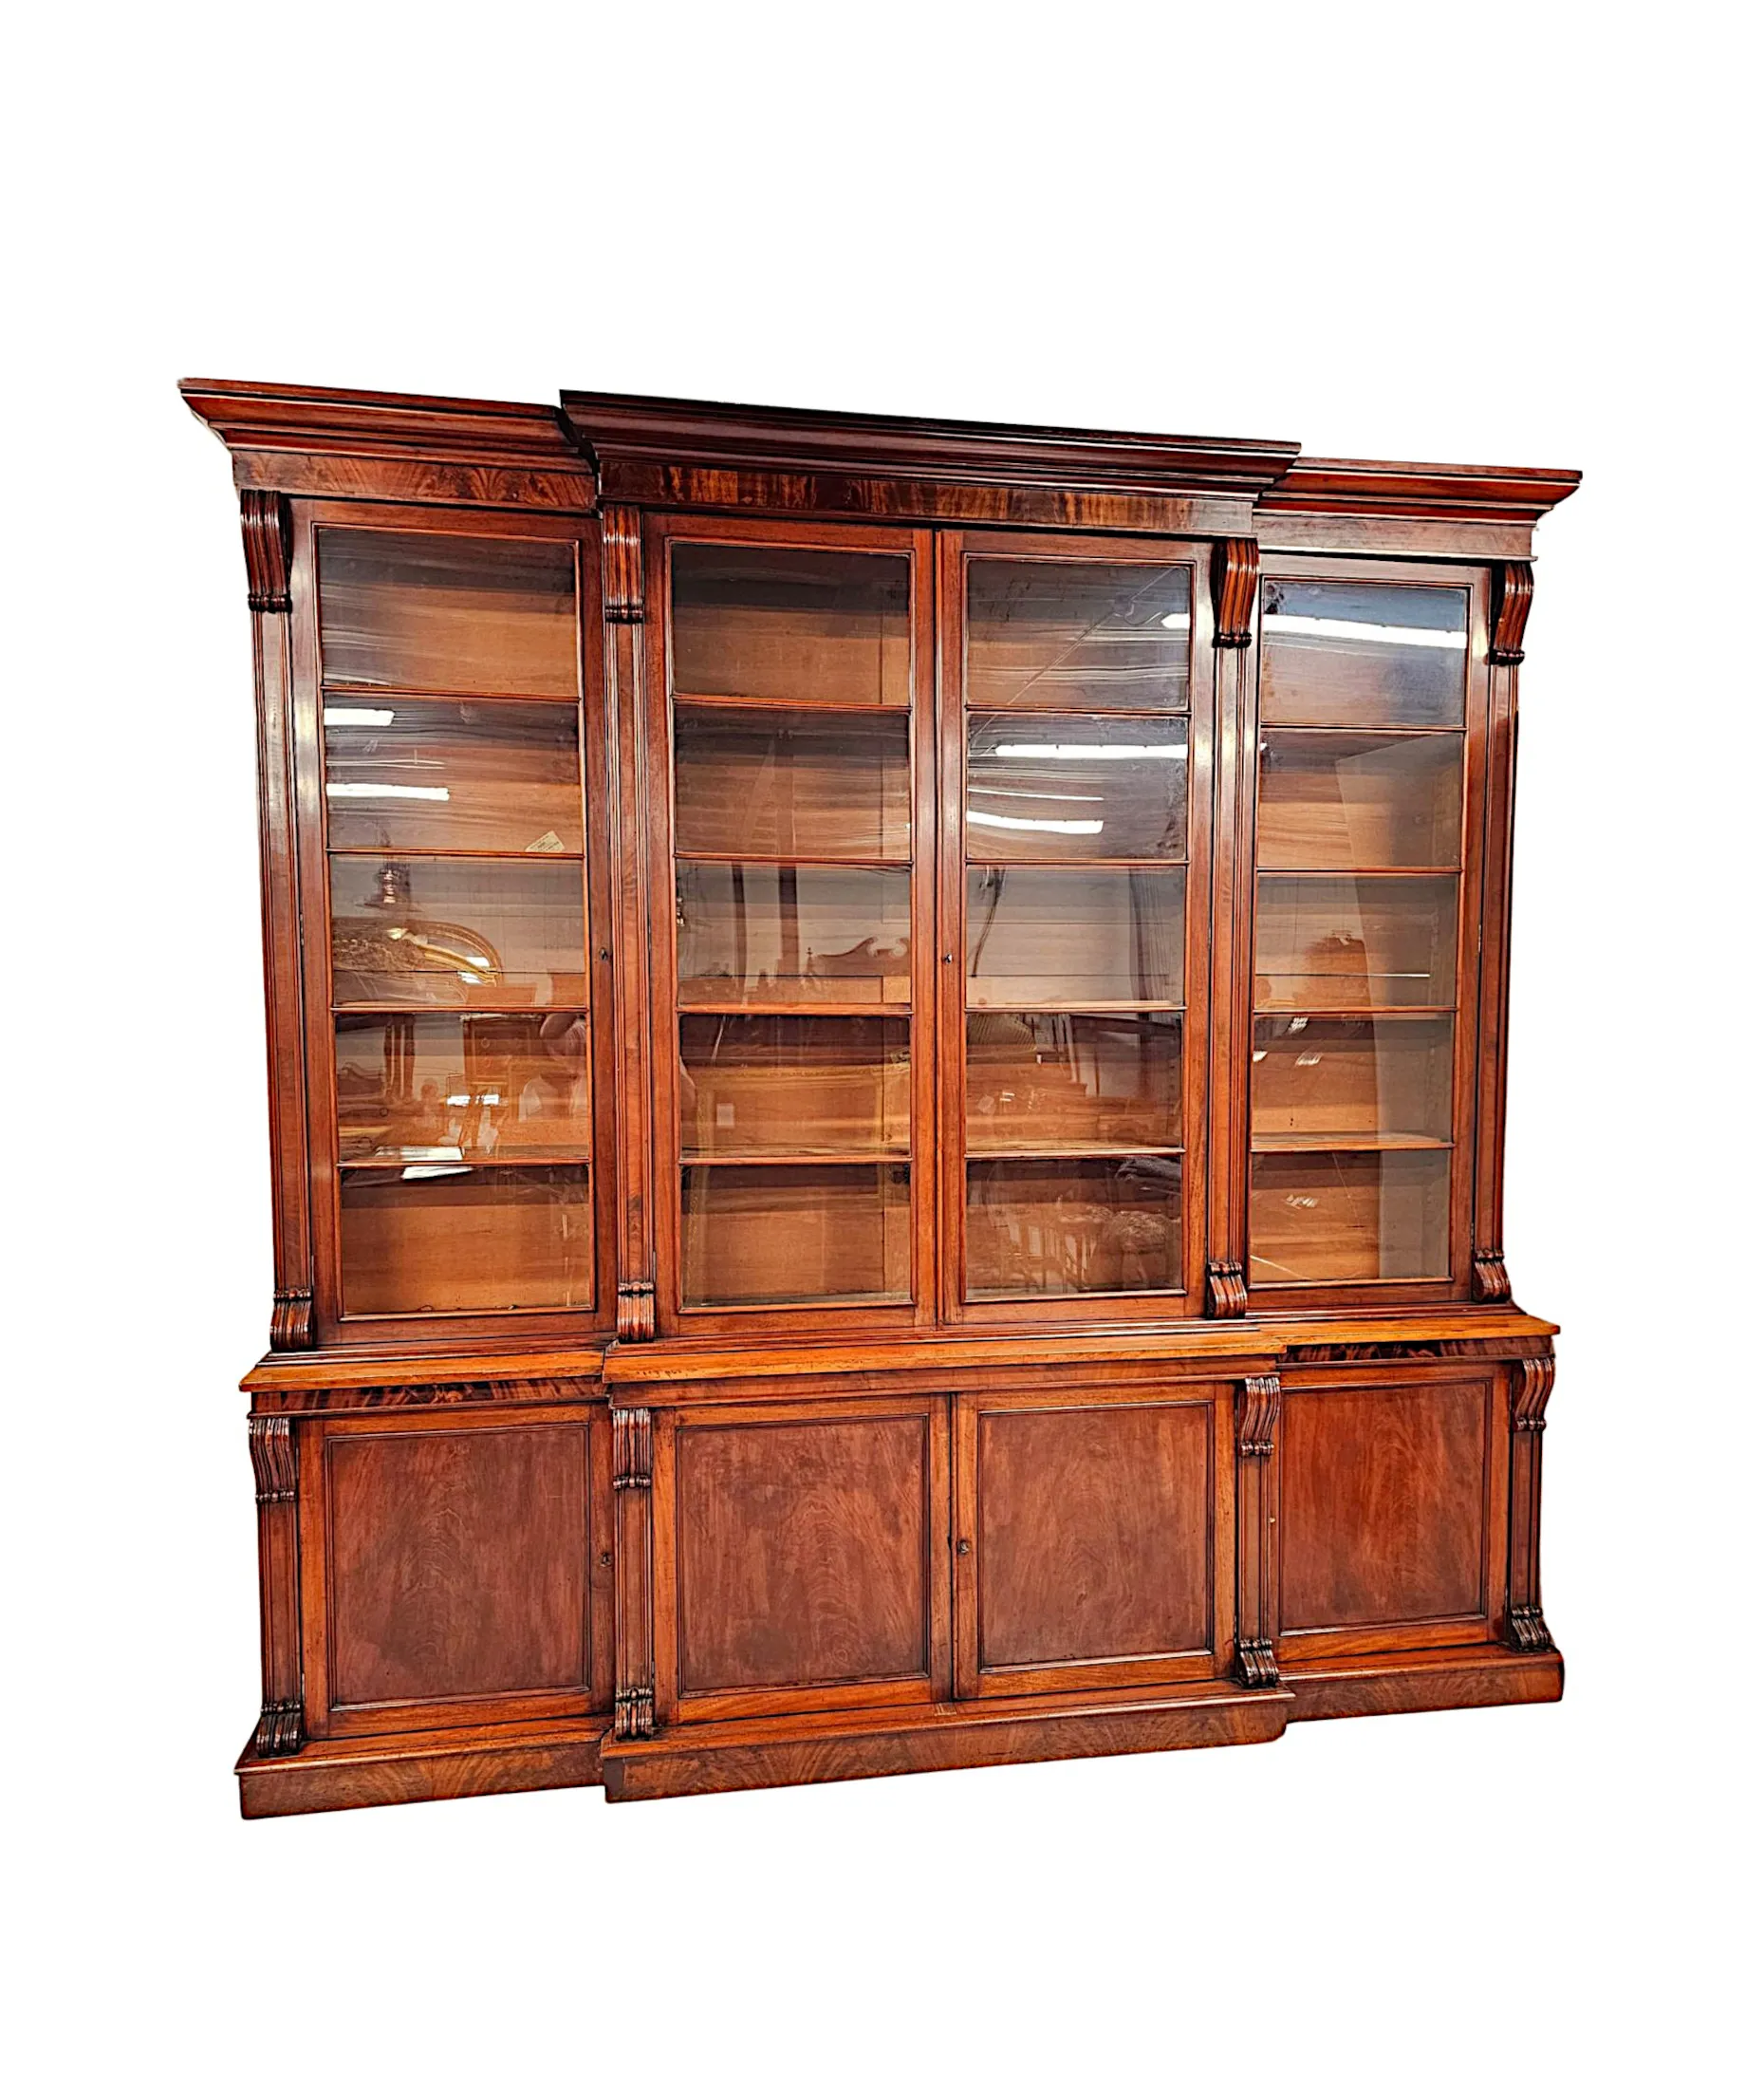 A Very Rare 19th Century Irish Four Door Breakfront Bookcase Labelled 'Strahan of Dublin'